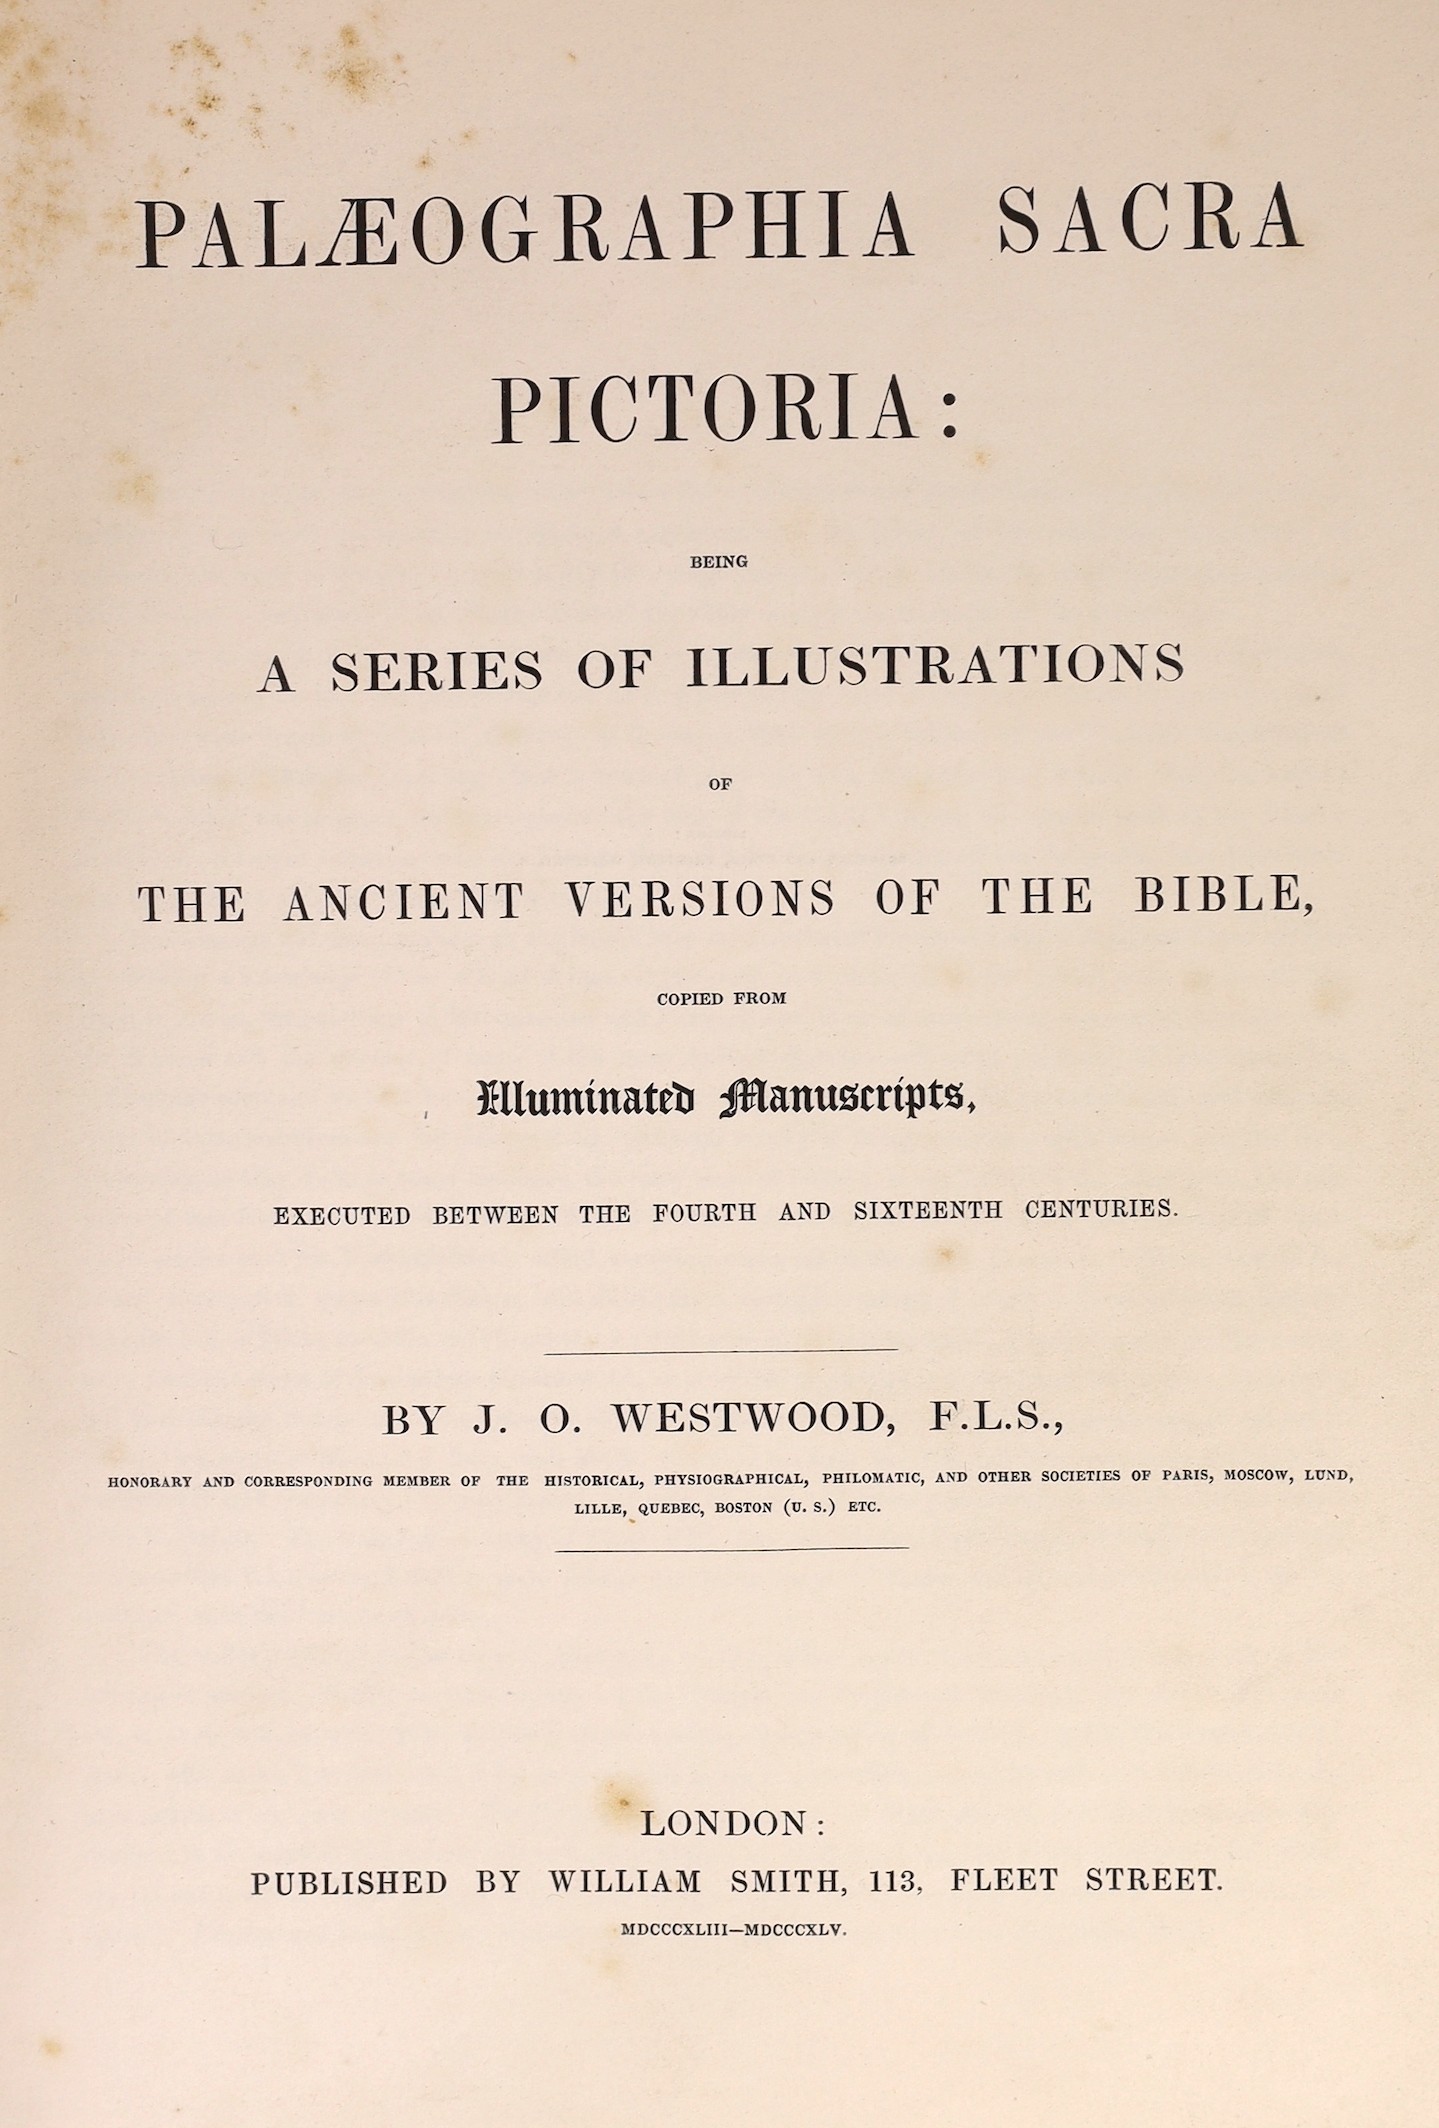 Westwood, J.O - Palaeographia Sacra Pictoria: Being a Series of Illustrations of the Ancient Versions of the Bible, 4to, calf, with 50 chromolithograph plates, front board detached, loss to lower spine, William Smith, Lo